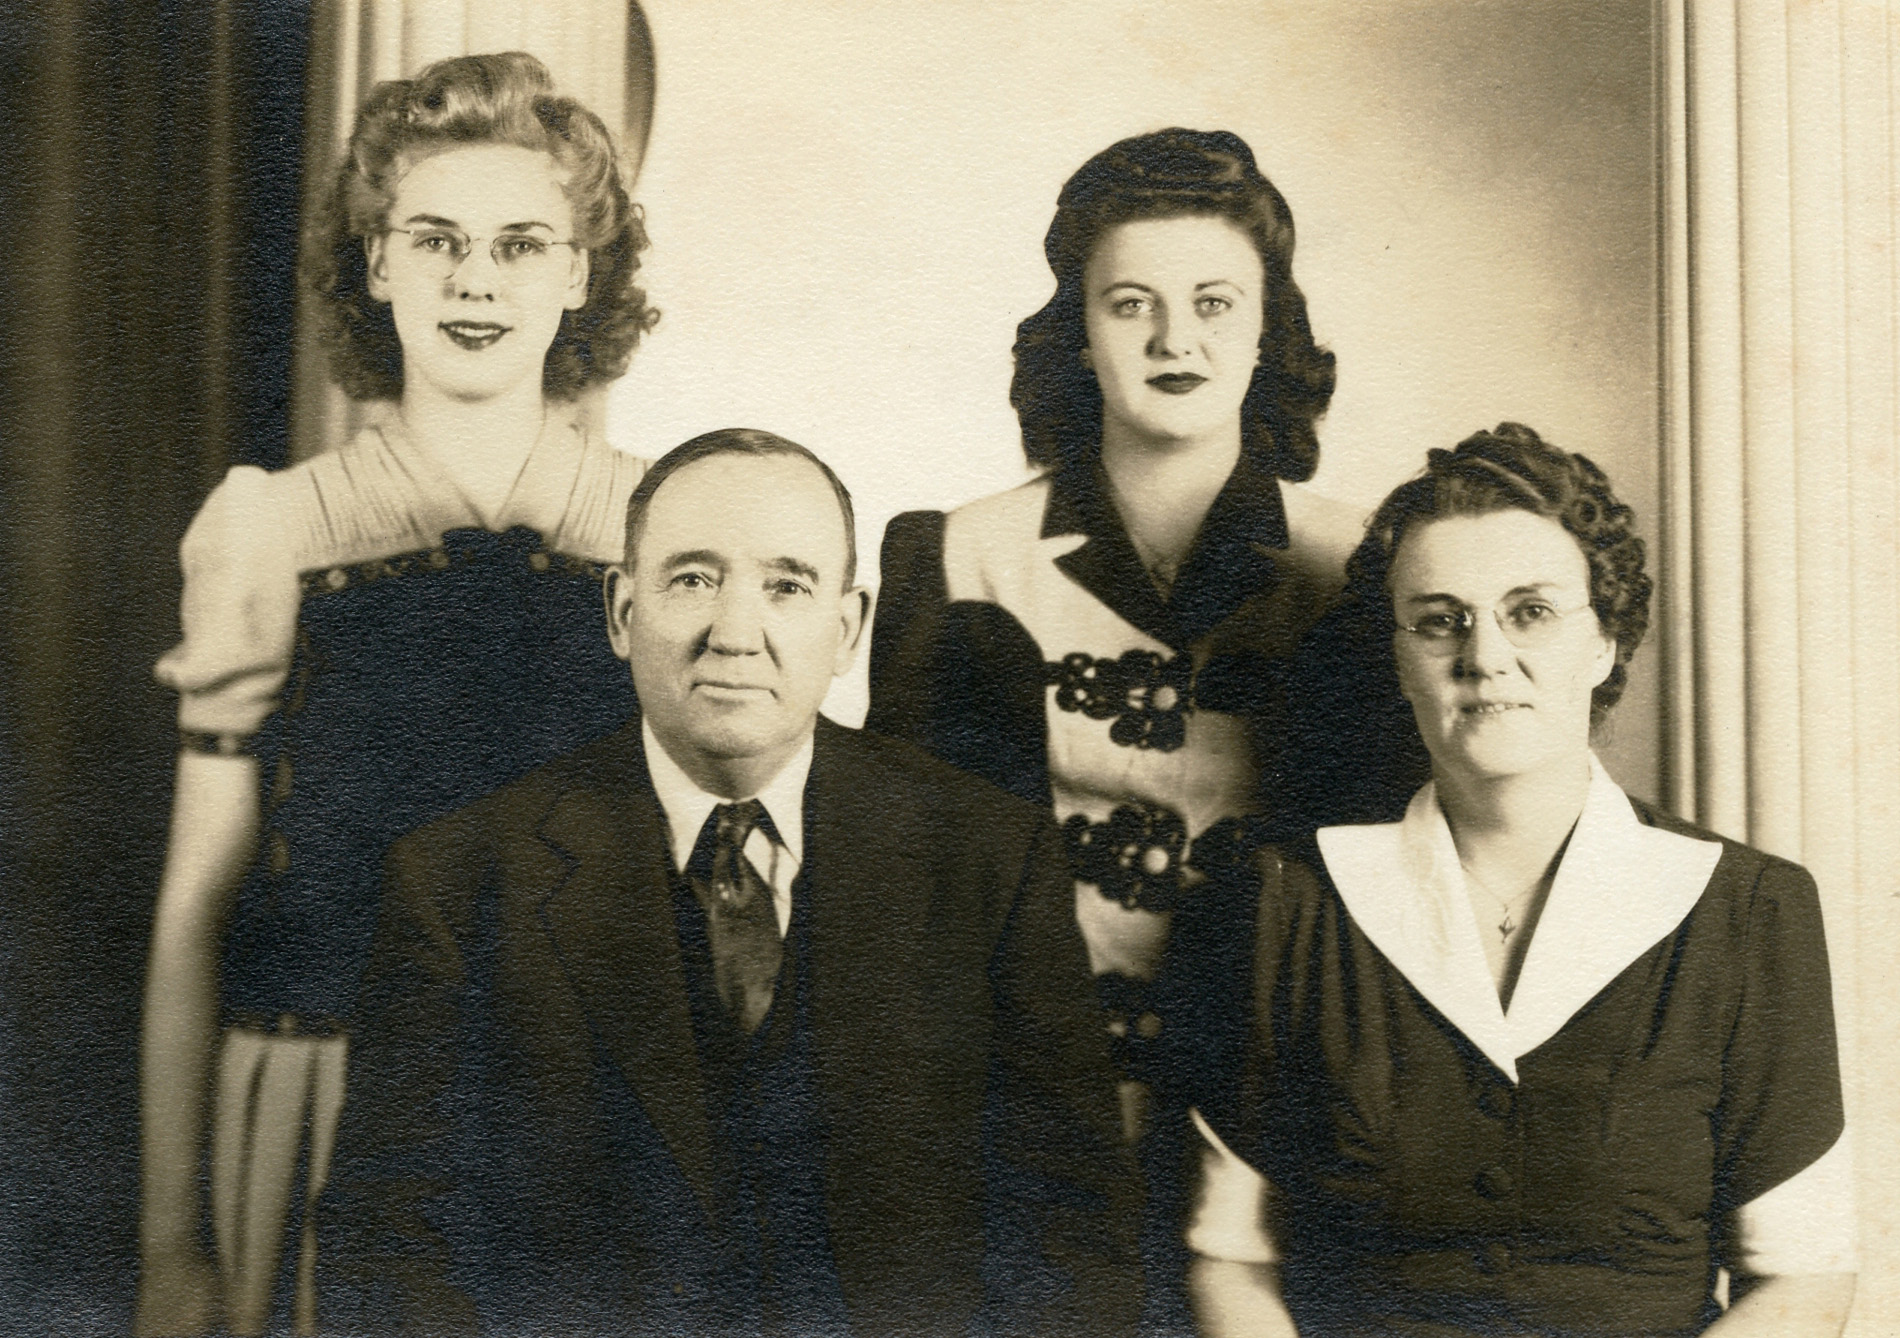 Owen and Lizzie Evans with their daughters, Ruth and Doris.